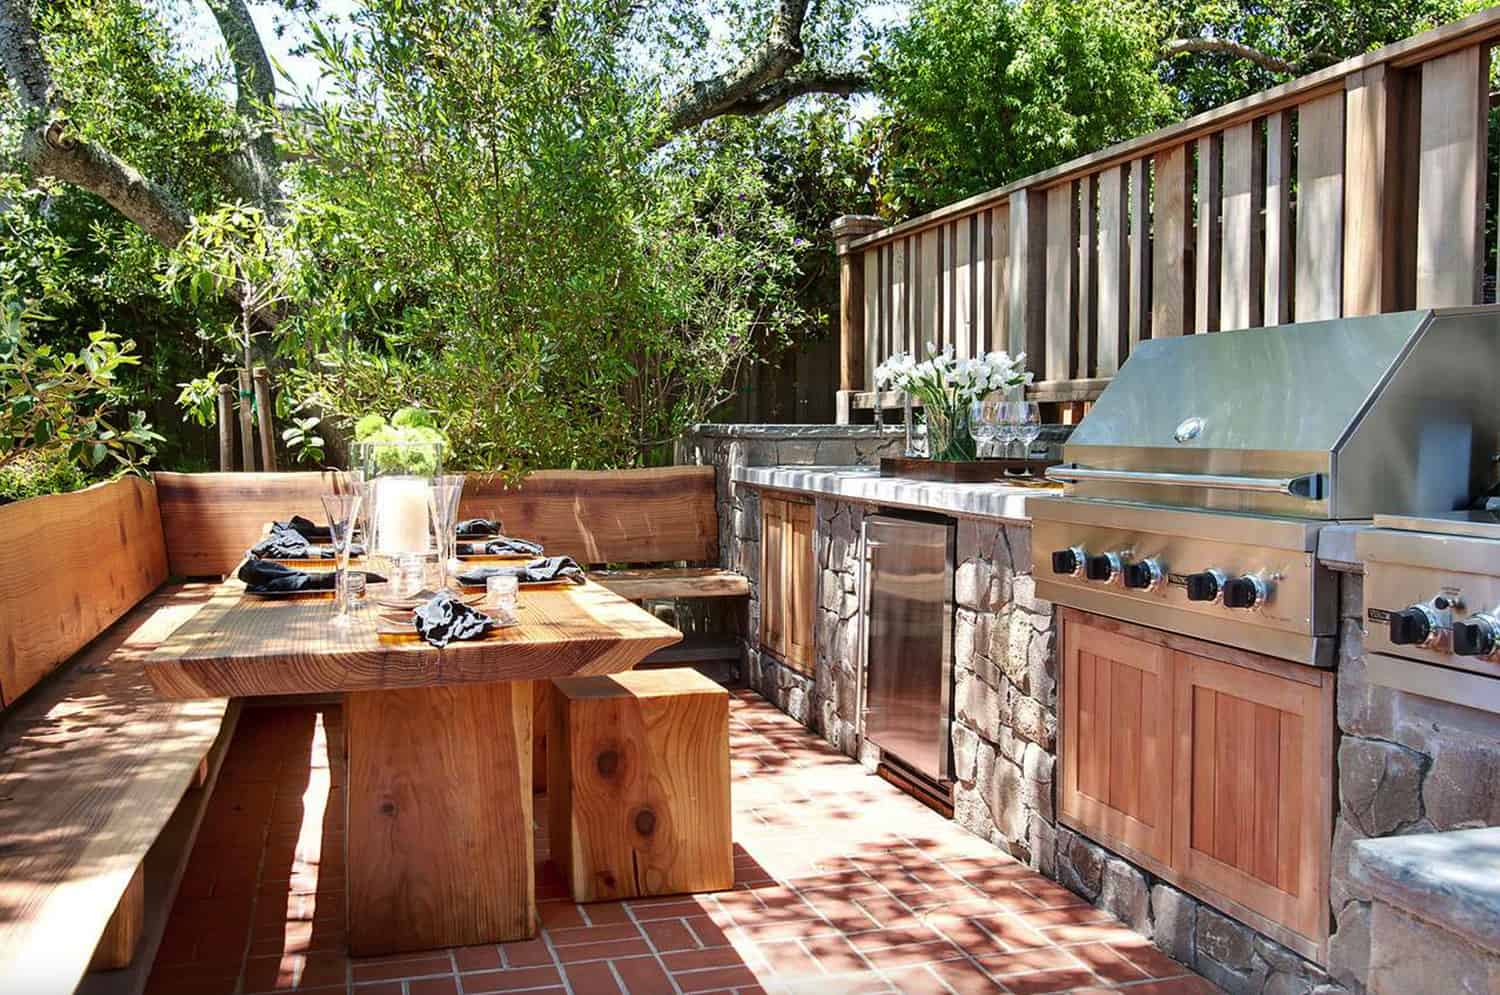 20 Most Amazing Outdoor Kitchen Design Ideas You'll Love